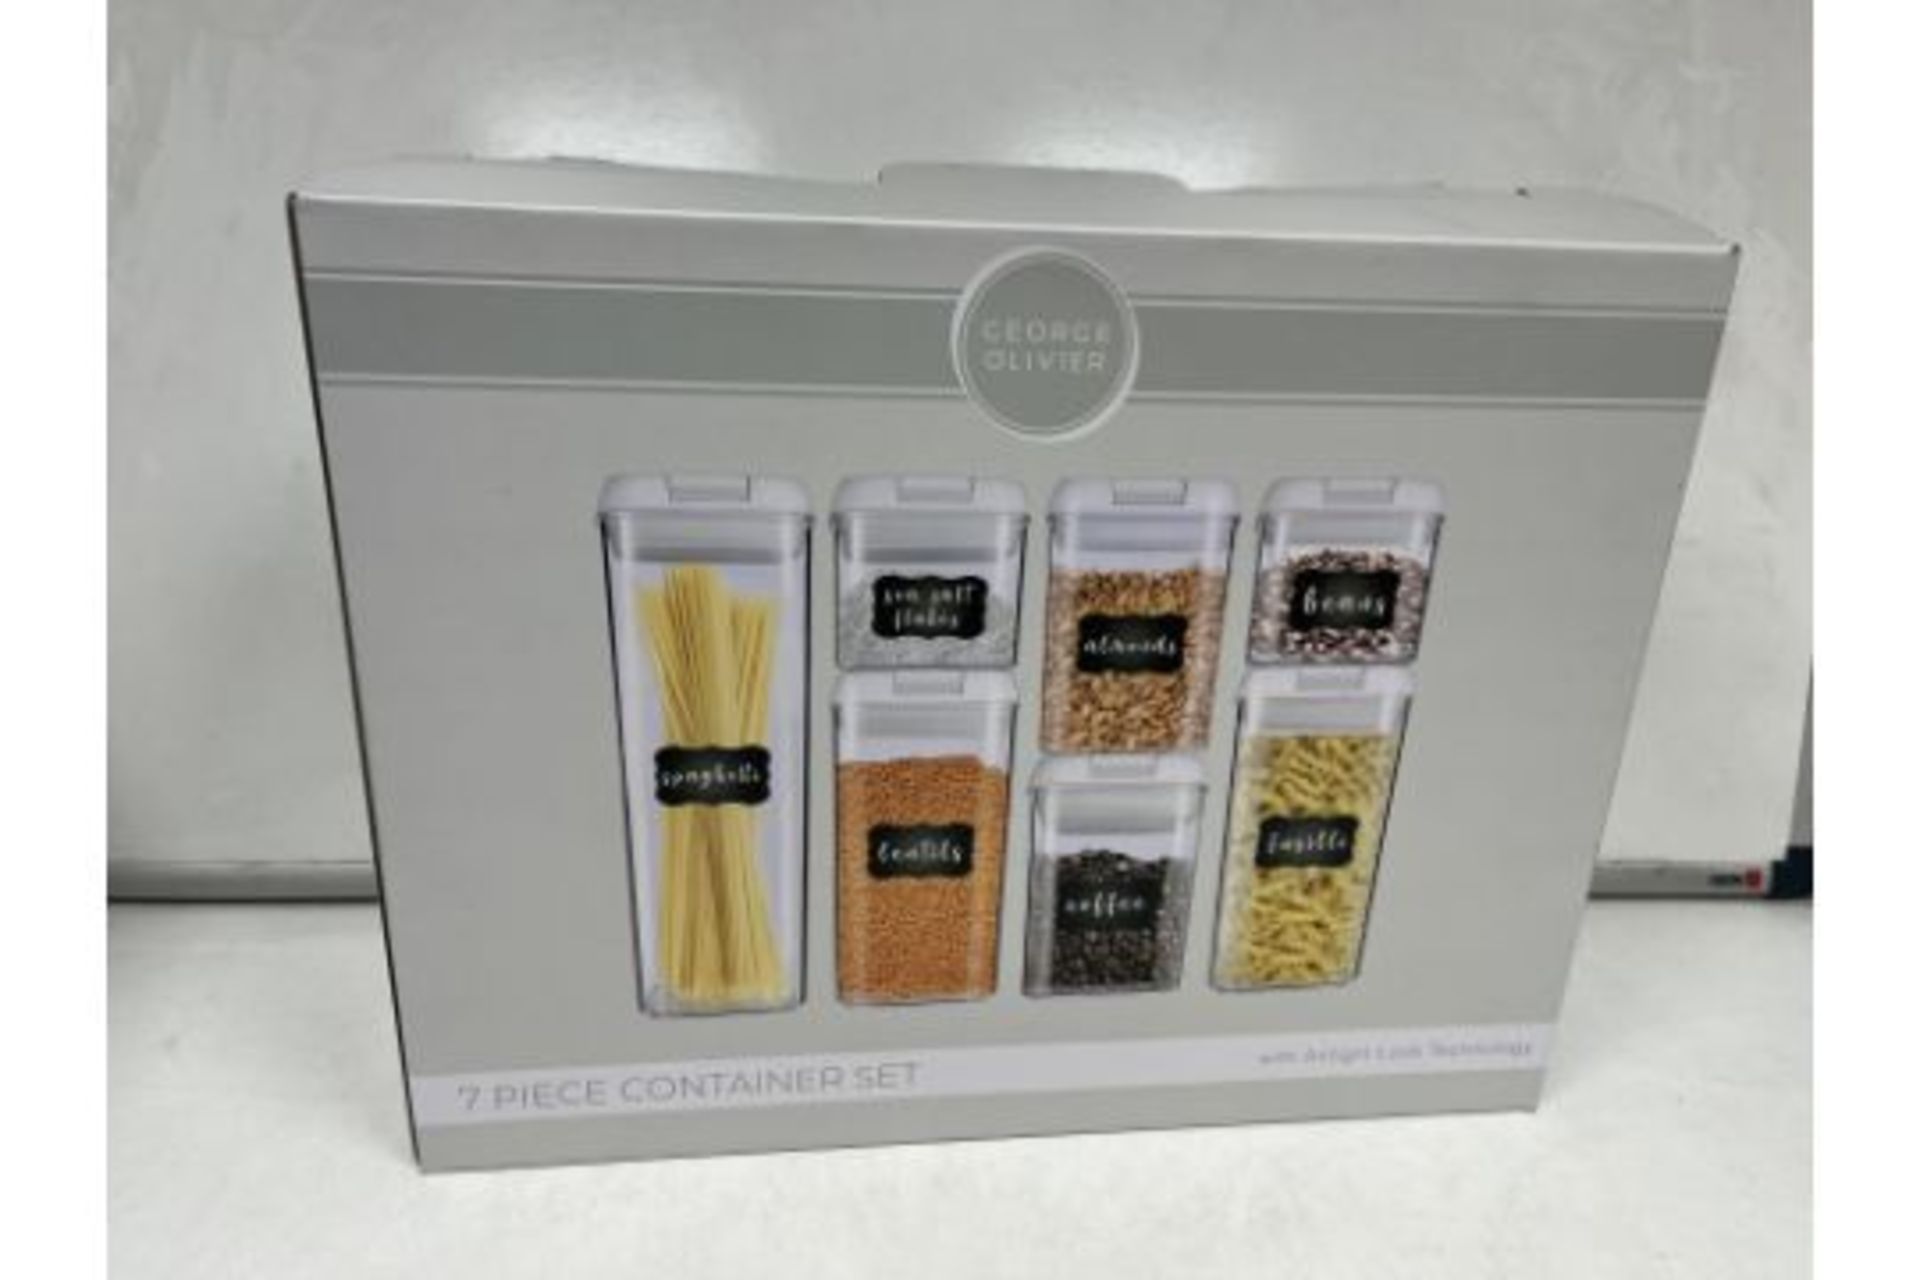 3 X BRAND NEW GEORGE OLIVER SET OF 7 PREMIUM STORAGE CONTAINERS RRP £50 EACH INCLUDES PENS AND LABEL